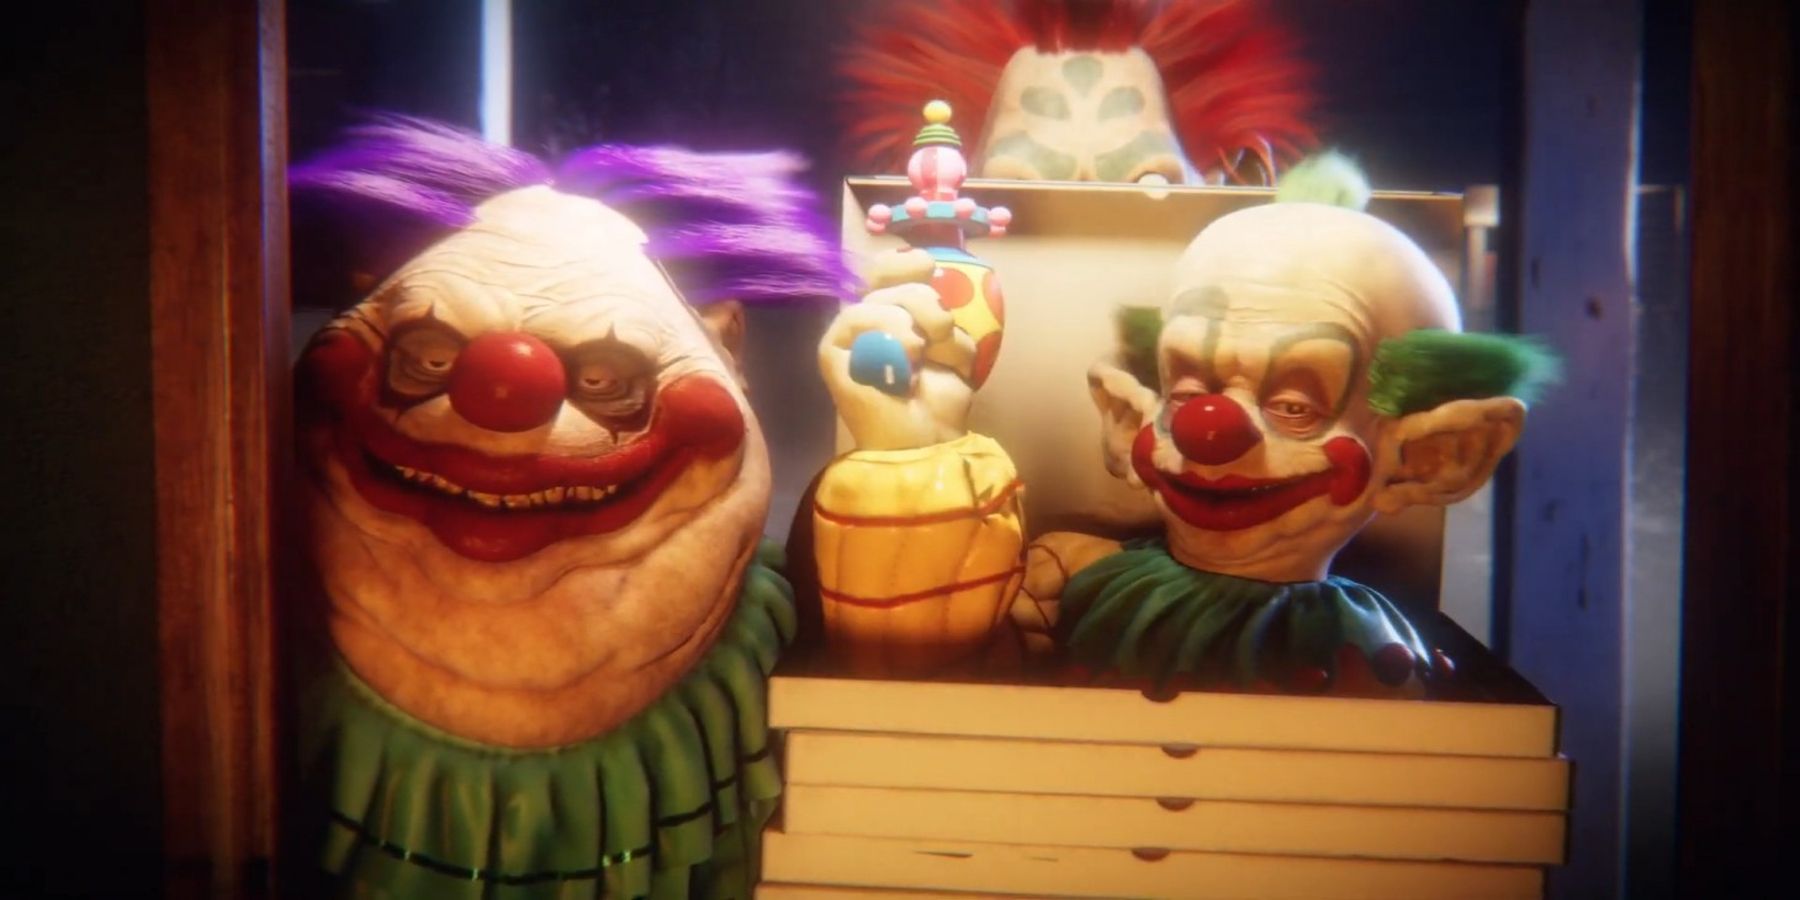 Killer Klowns From Outer Space from the trailer